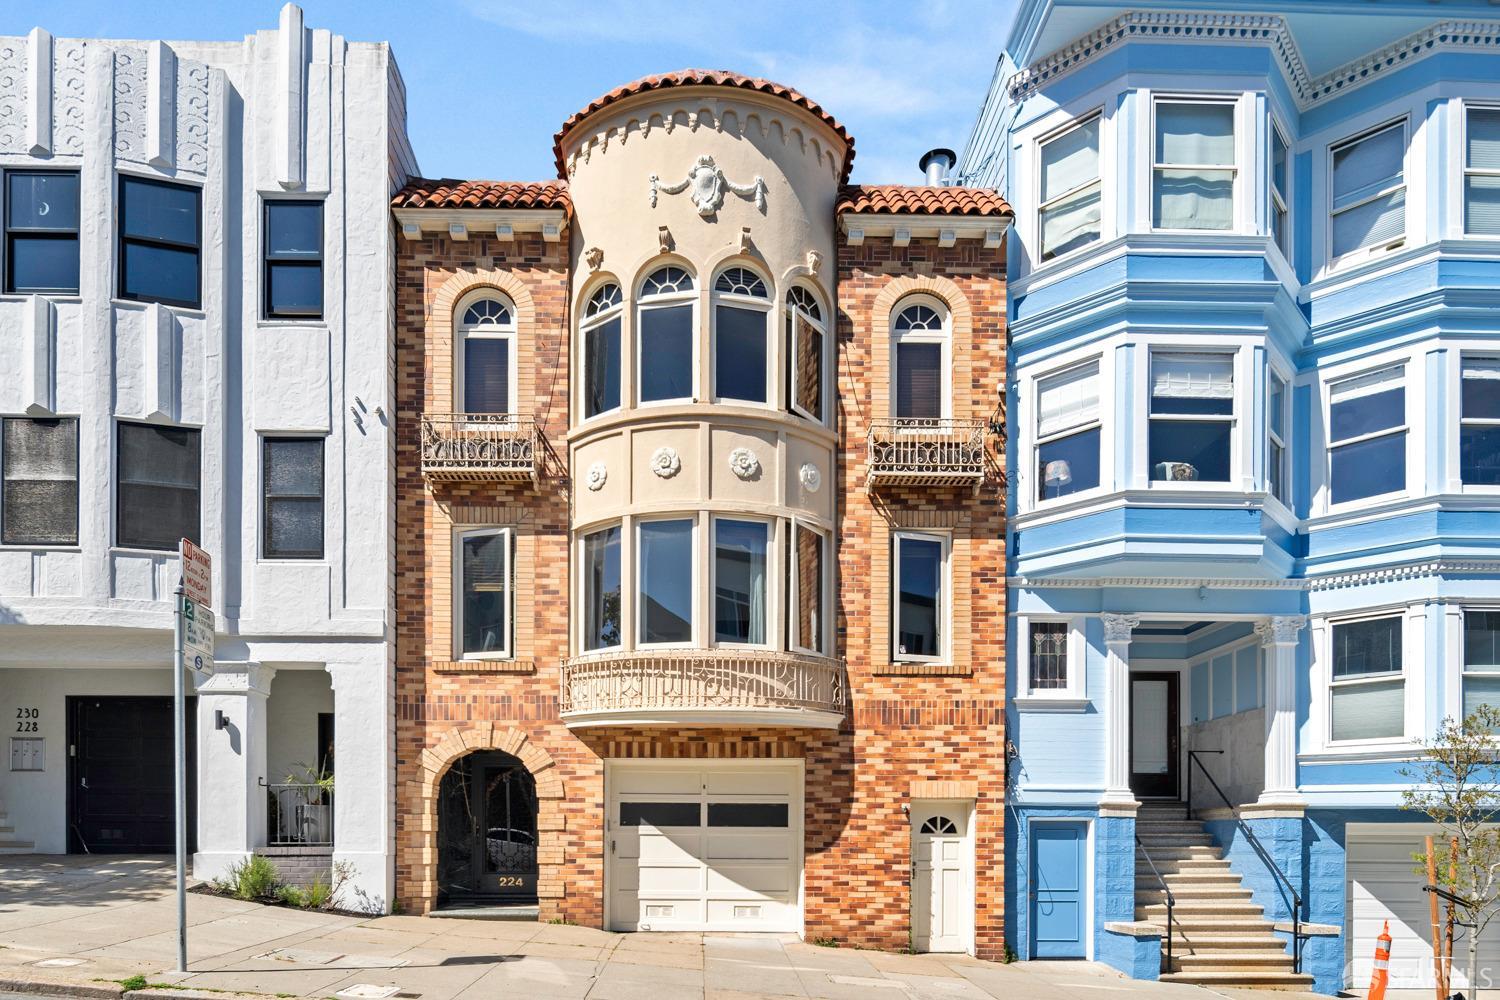 Photo of 222224 Liberty St in San Francisco, CA